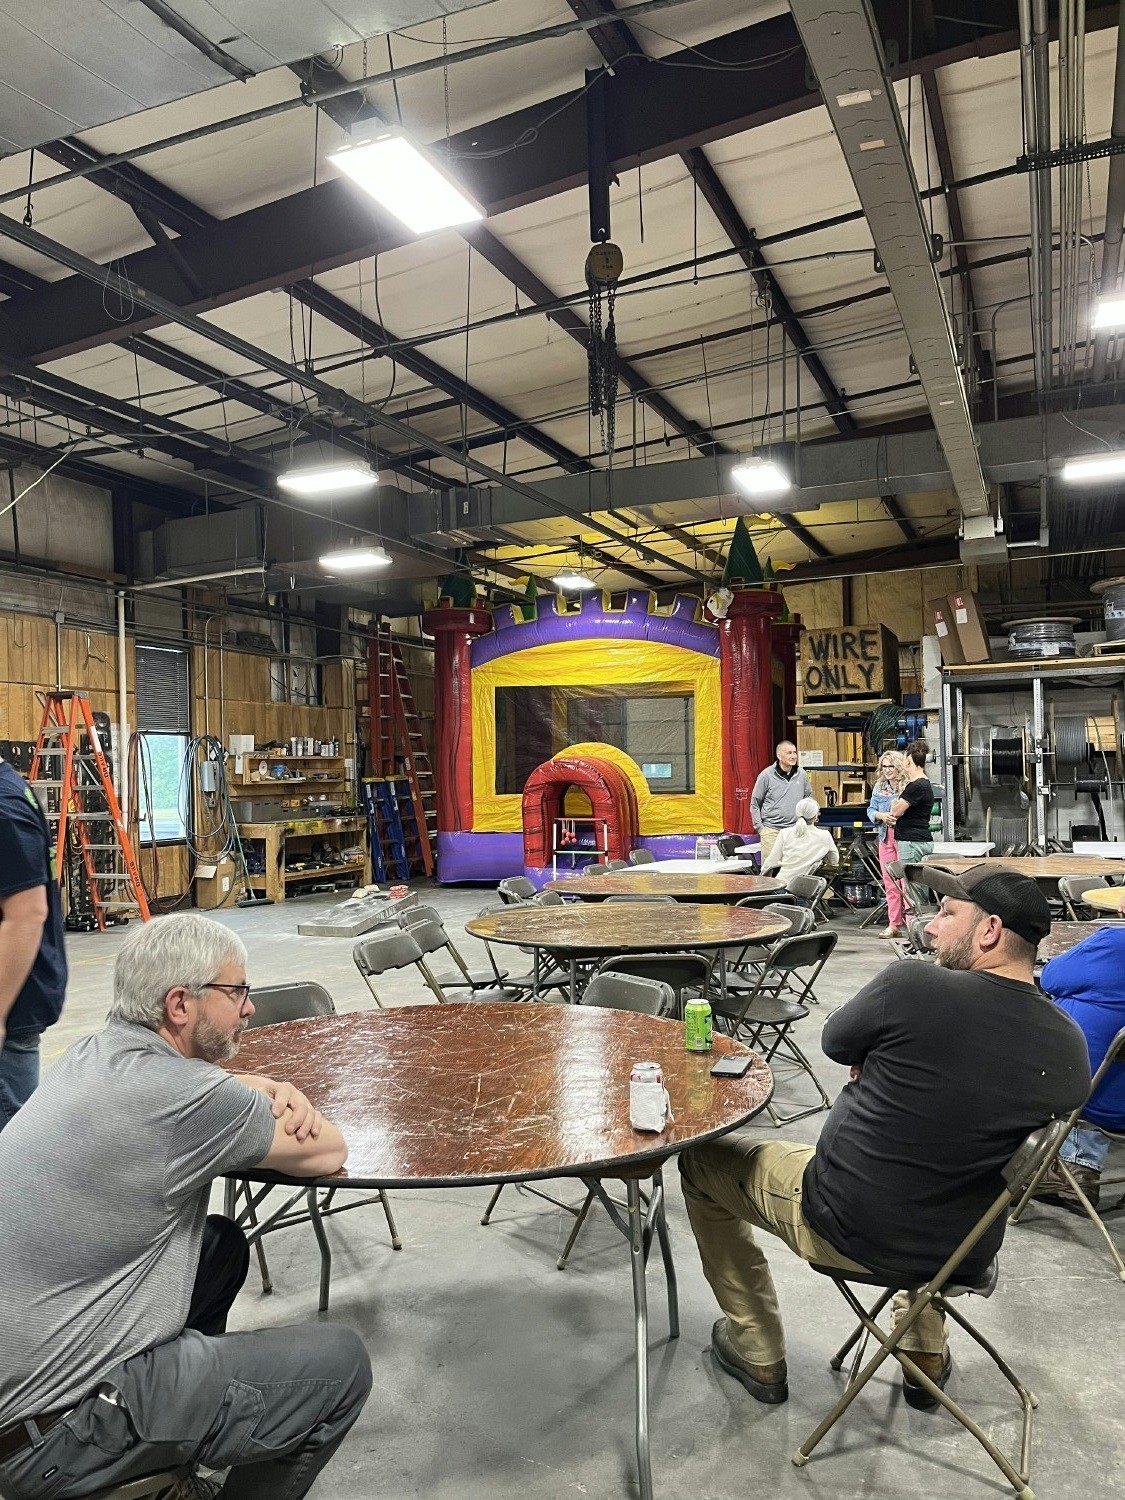 When it pours rain on company picnic day, you move it inside along with the bouncy house!